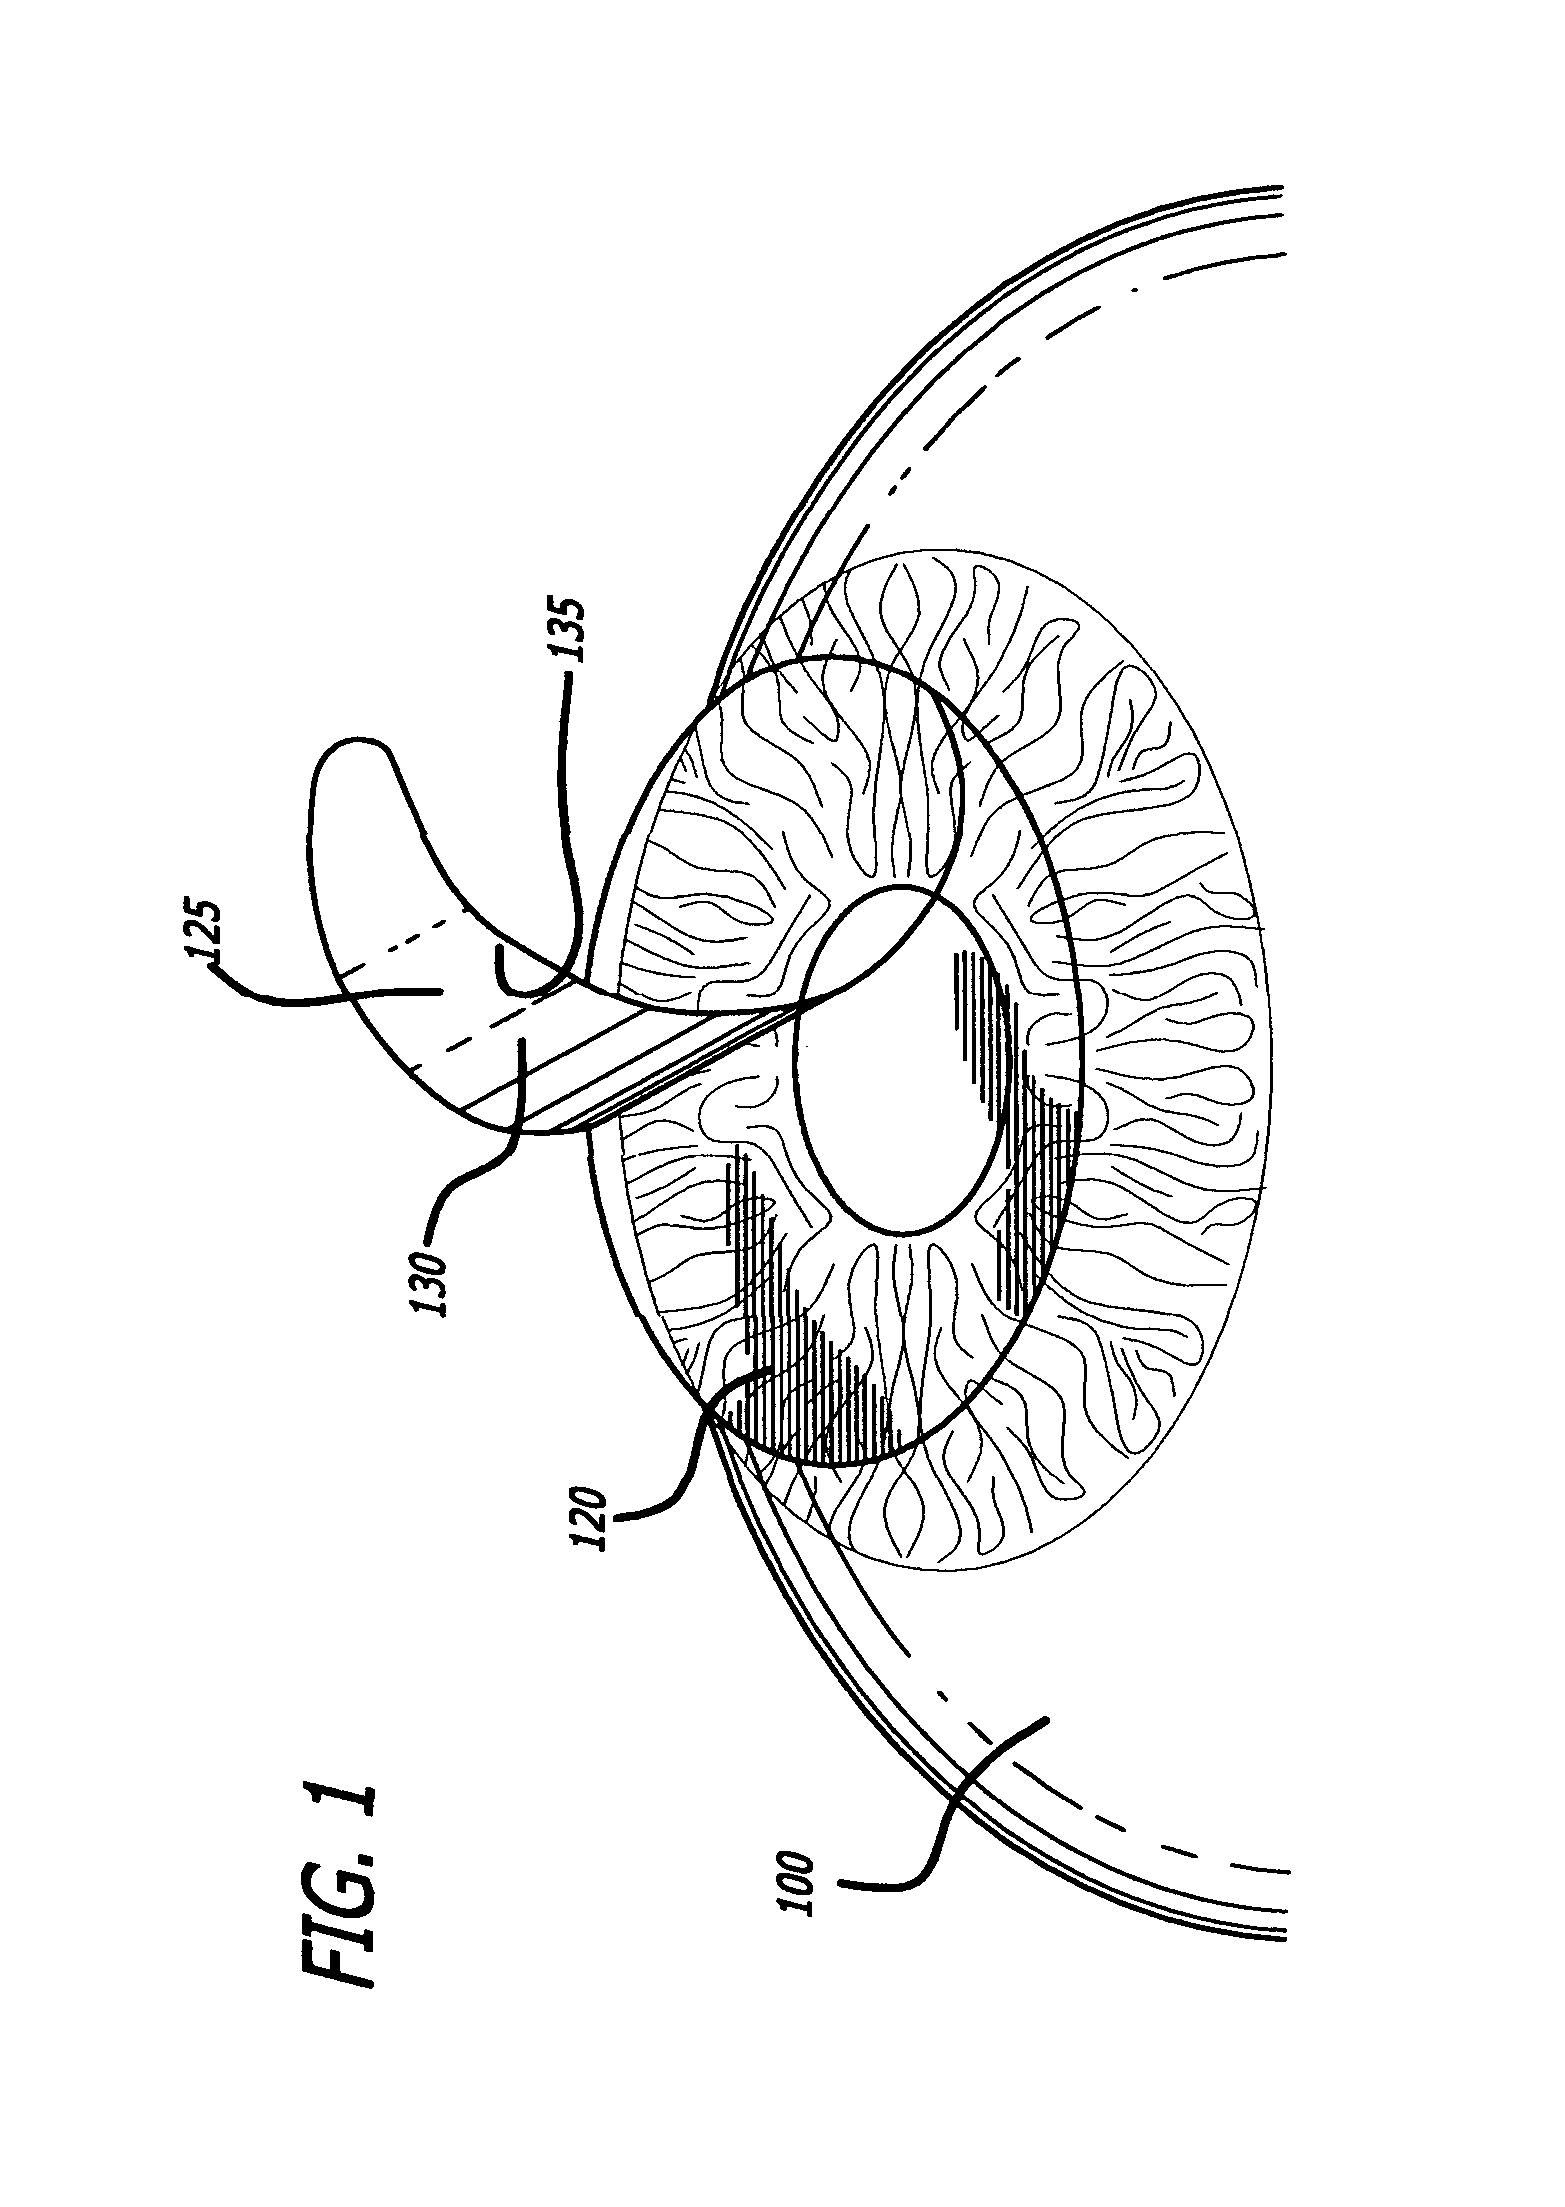 Method of correcting vision problems using only a photodisruption laser